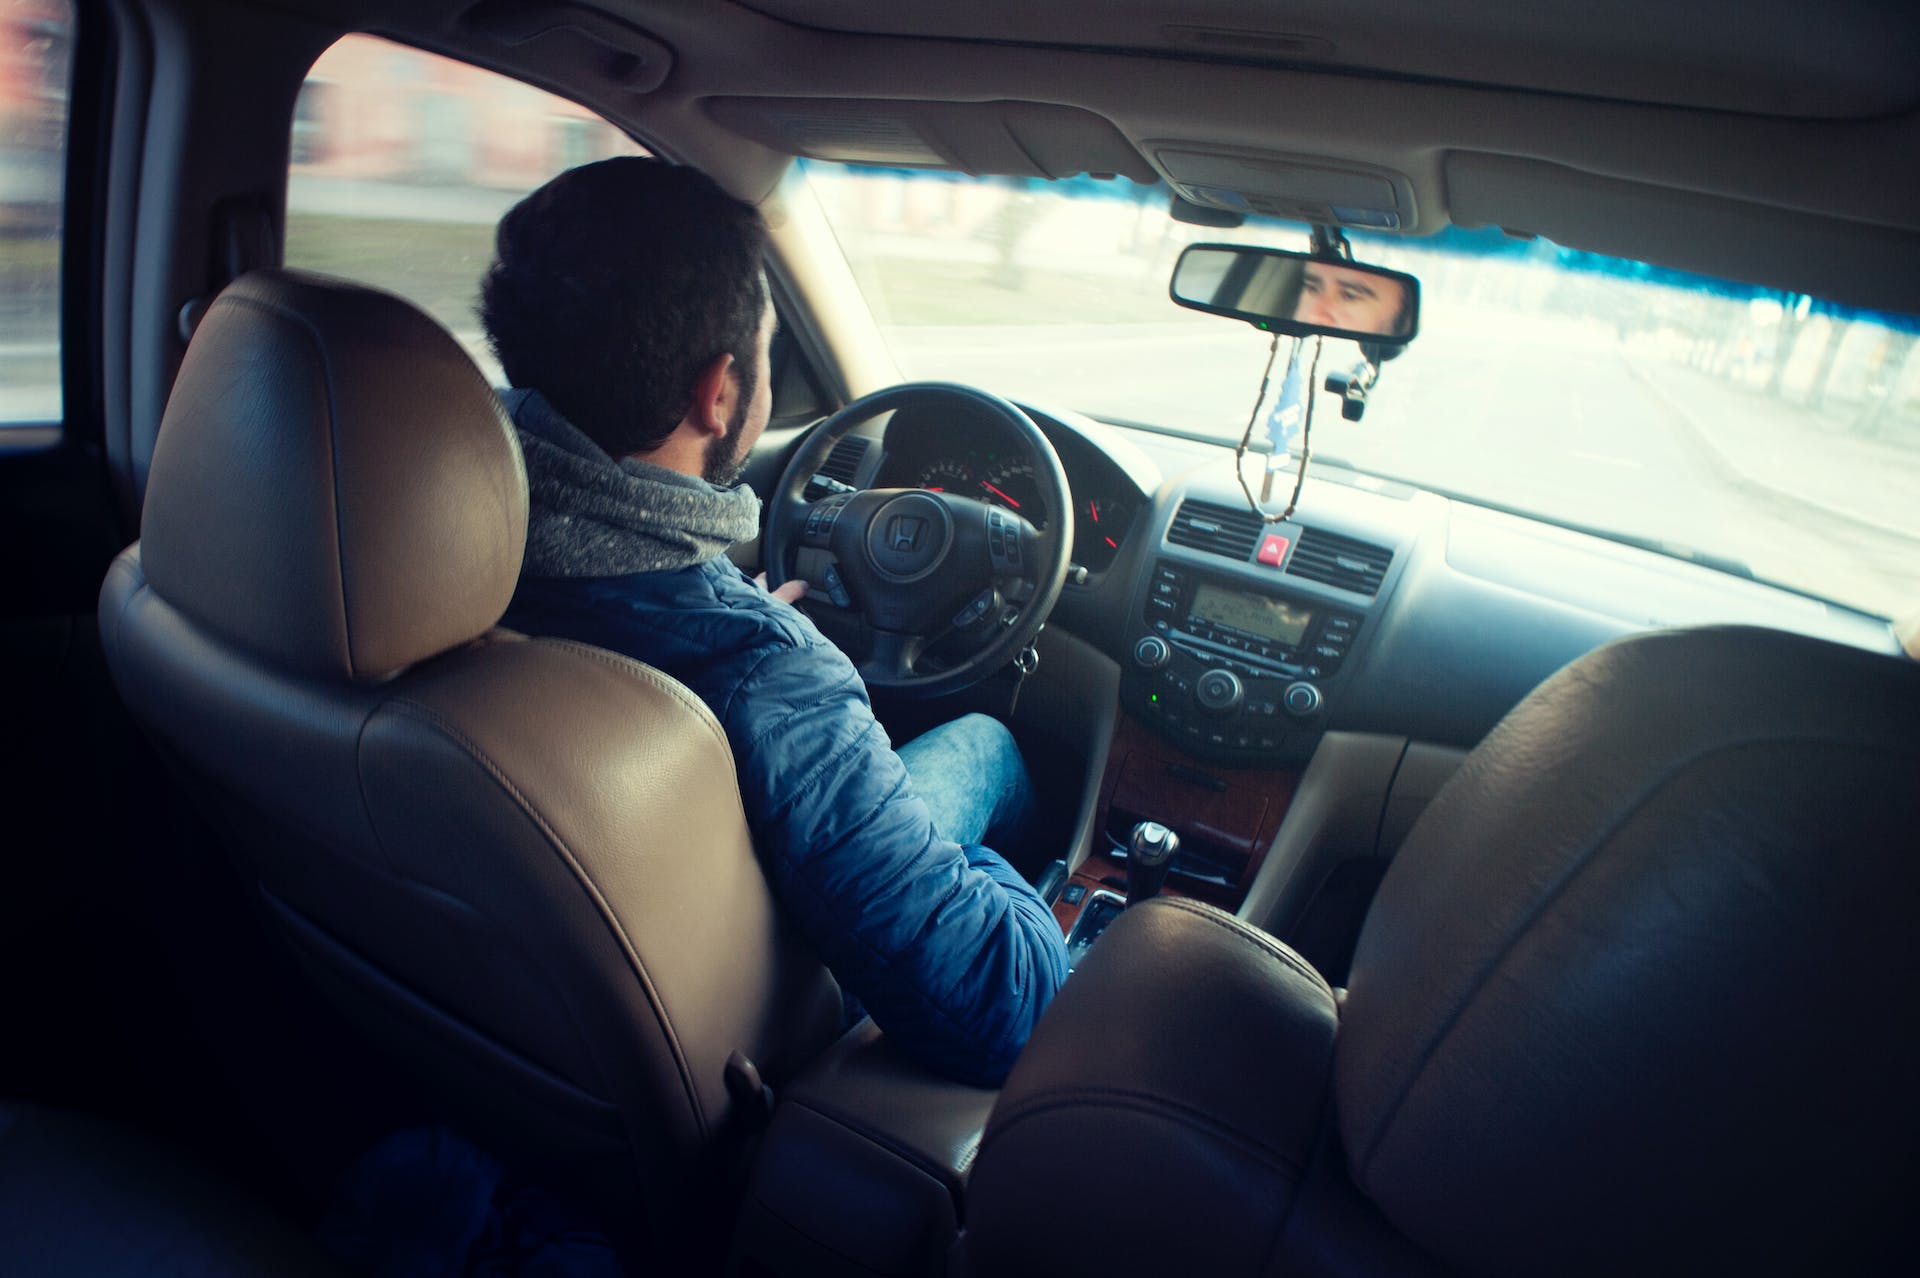 Person driving | Source: Pexels